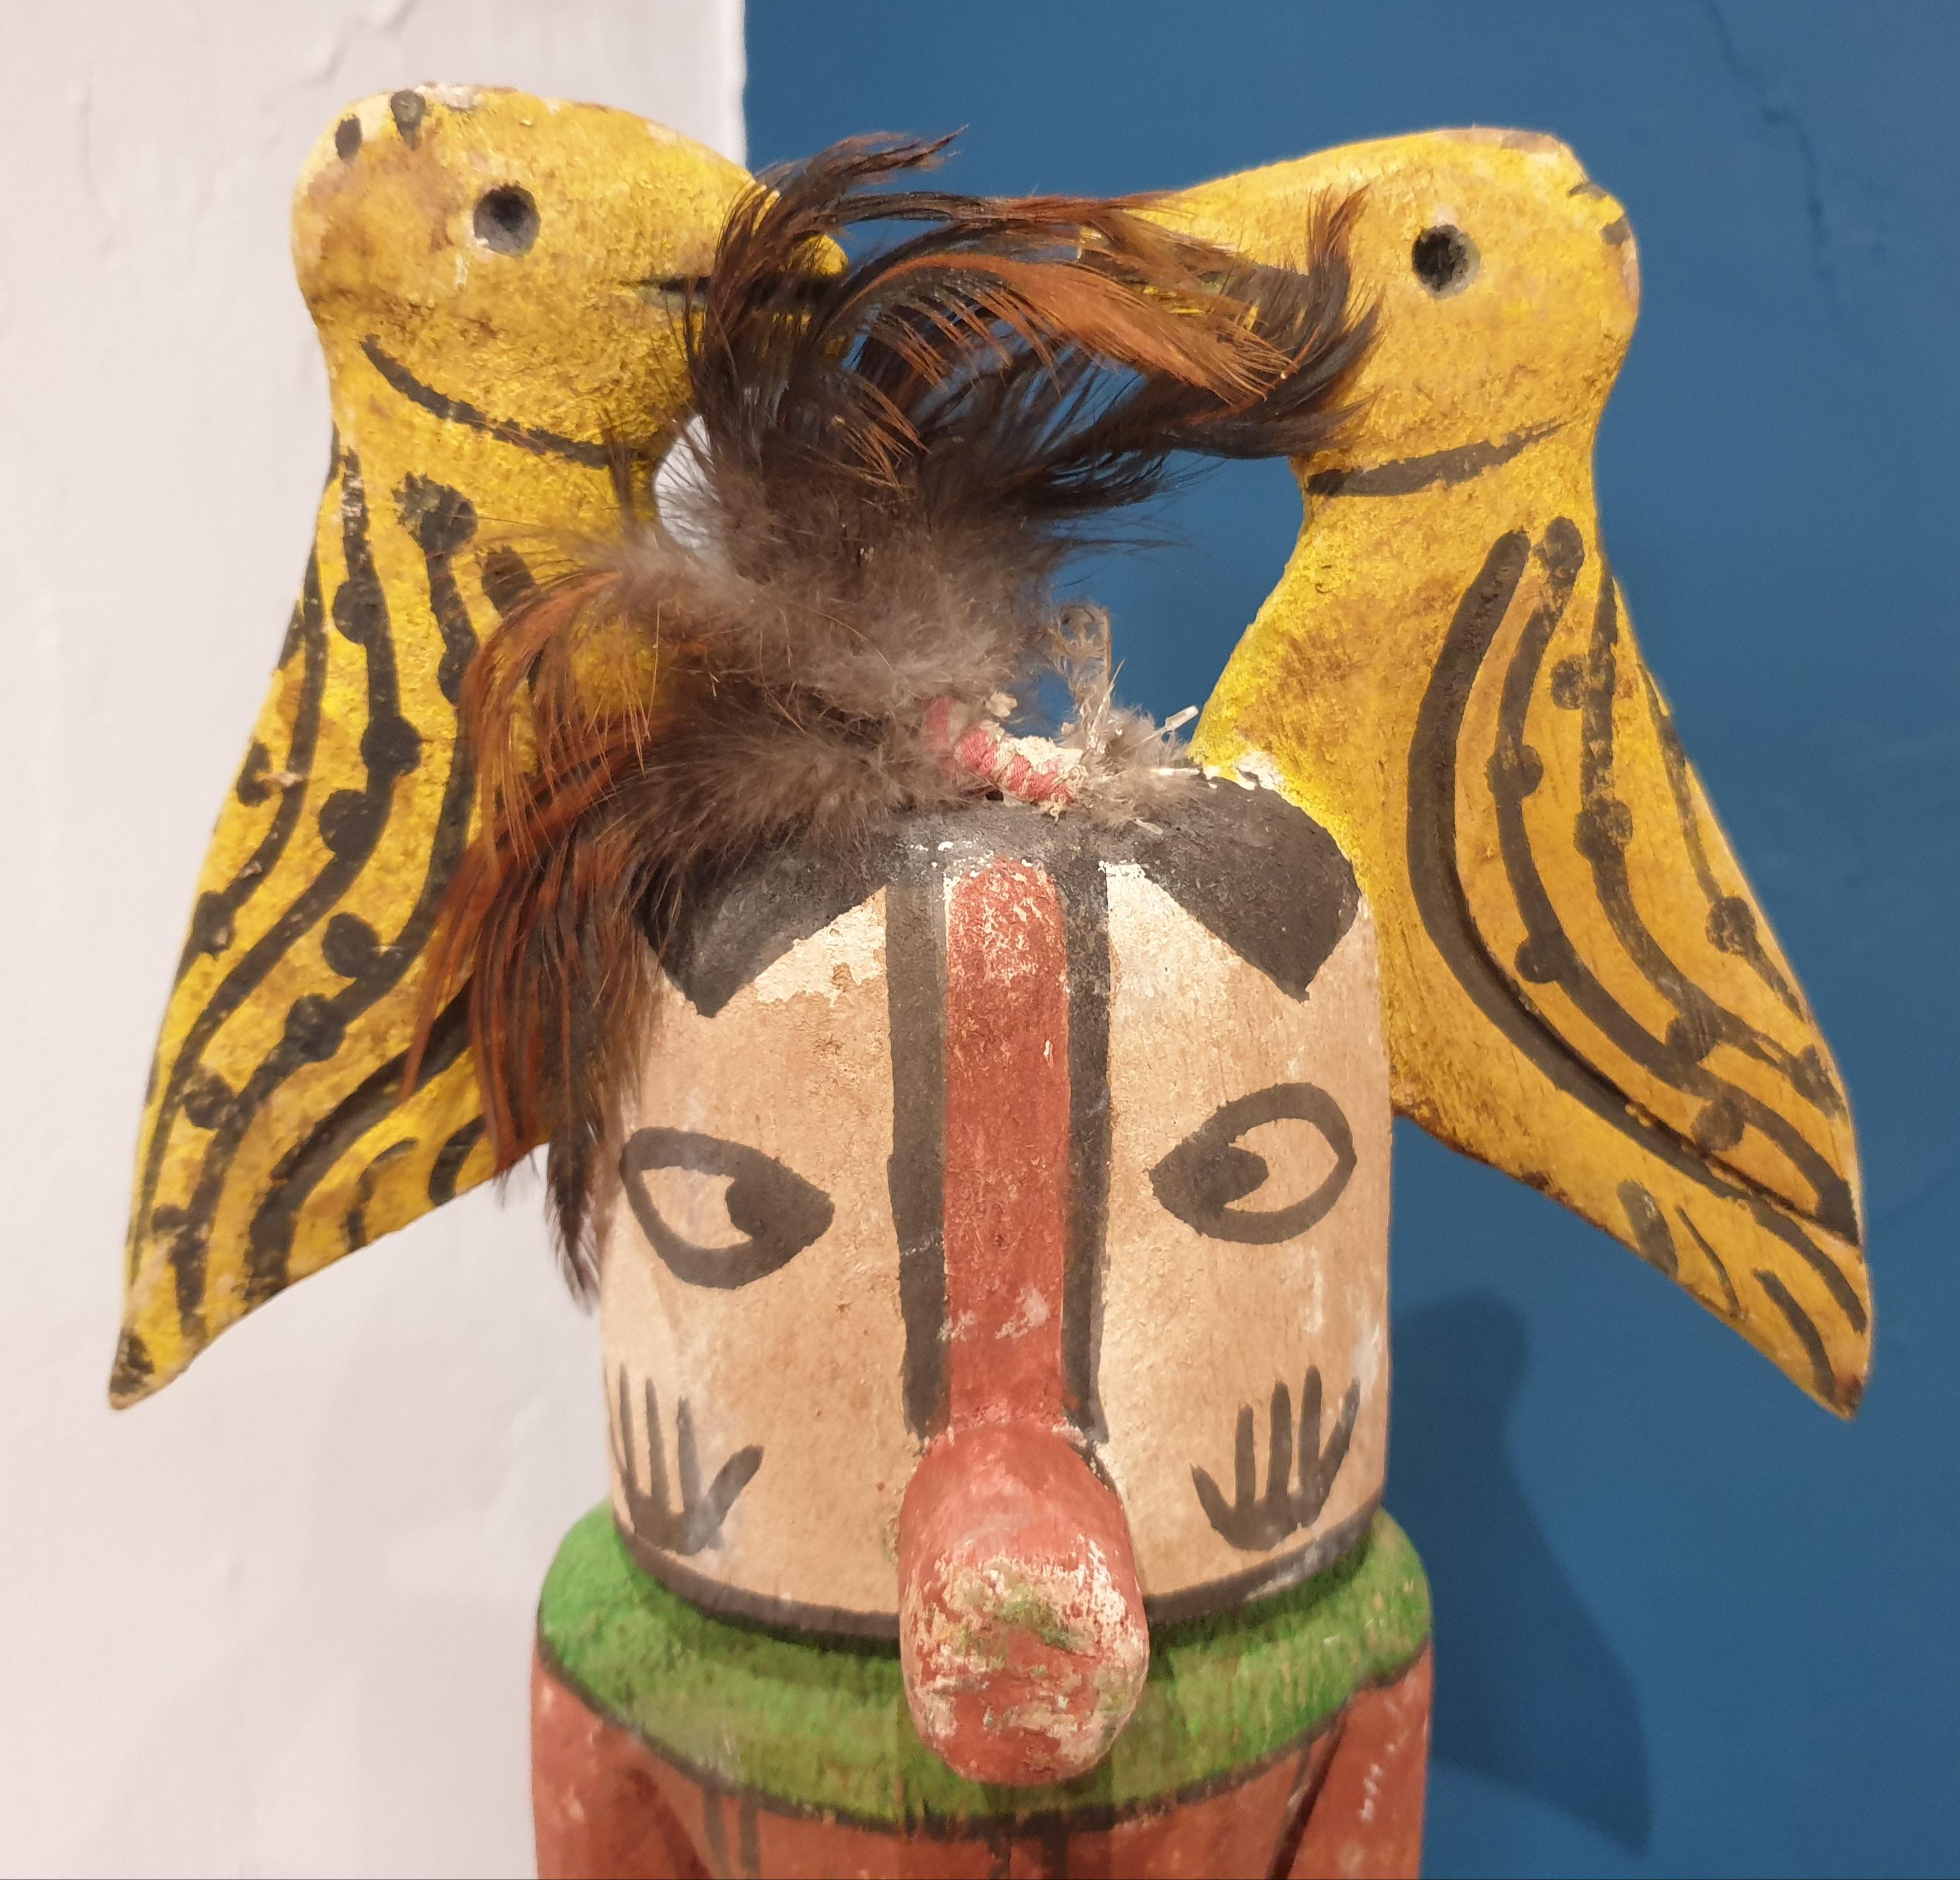 Native North American carved wood and painted effigy figure, Hopi Katsina or Kachina doll. 

Hopi Katsina dolls are wooden effigies of the Katsinam (plural), or benevolent spirit beings, who visit the Hopi for about half of every year. Traditionally